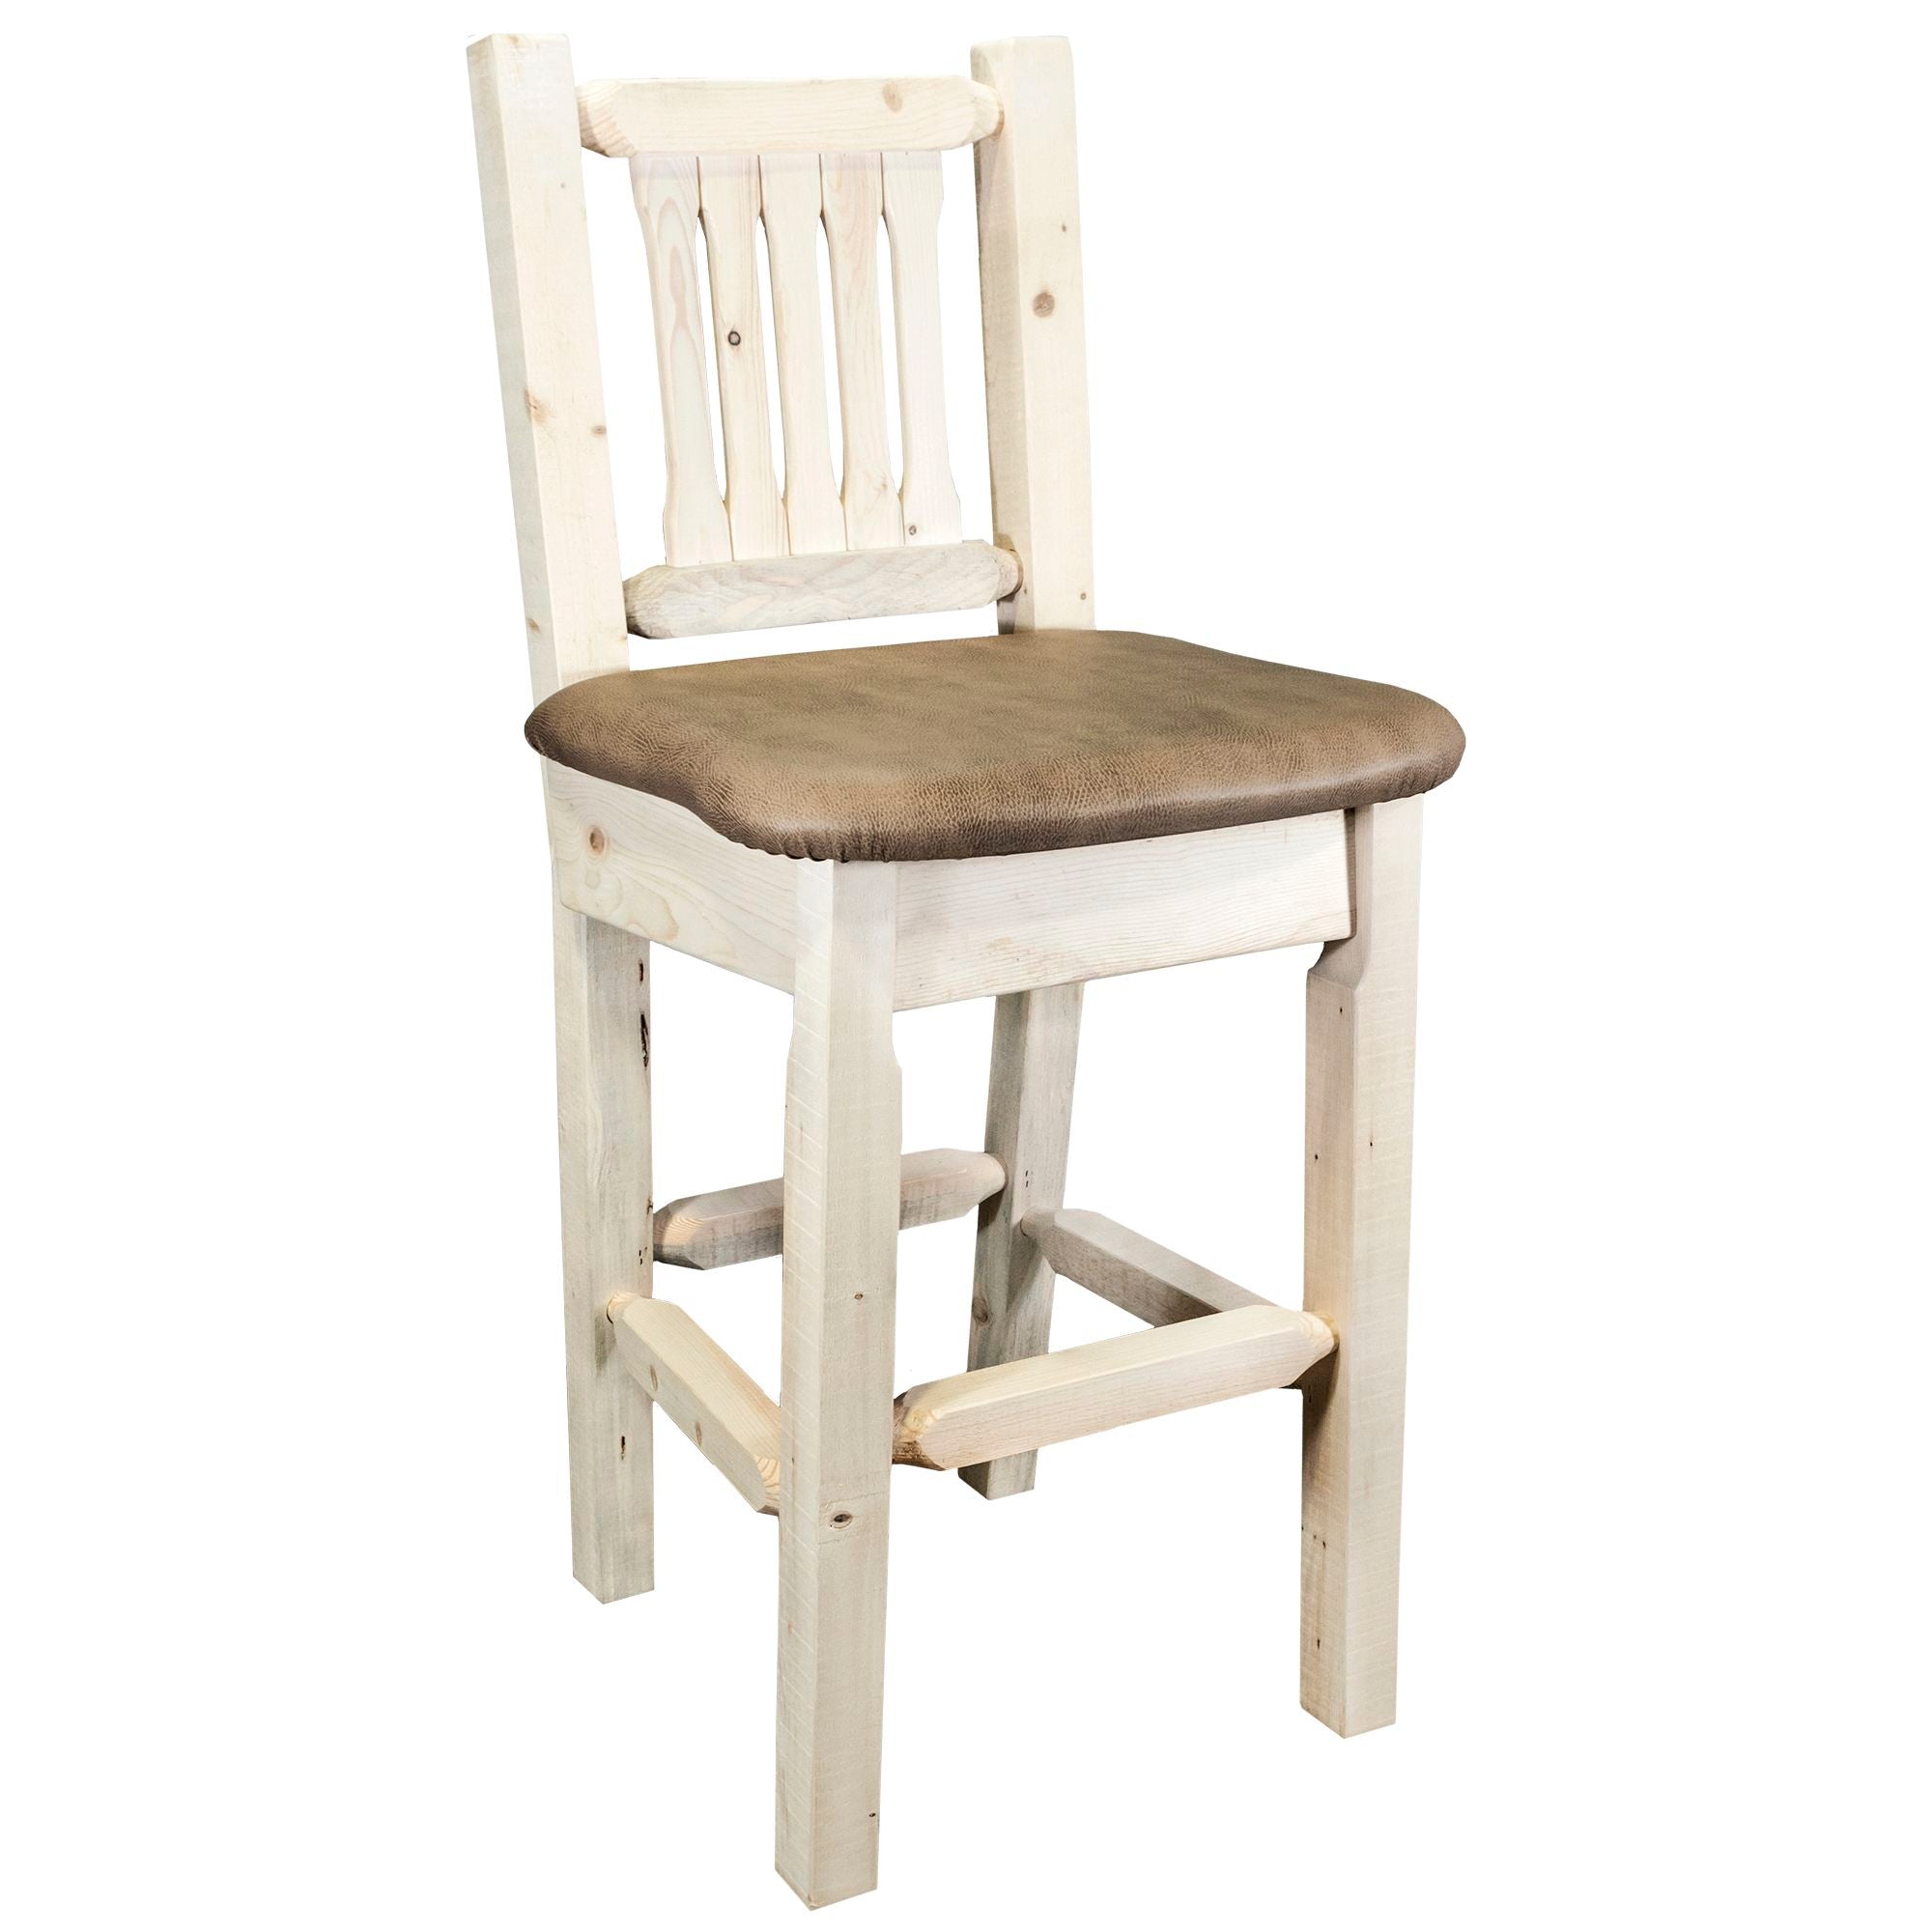 Montana Woodworks Homestead Collection Counter Height Barstool w/ Back - Buckskin Upholstery